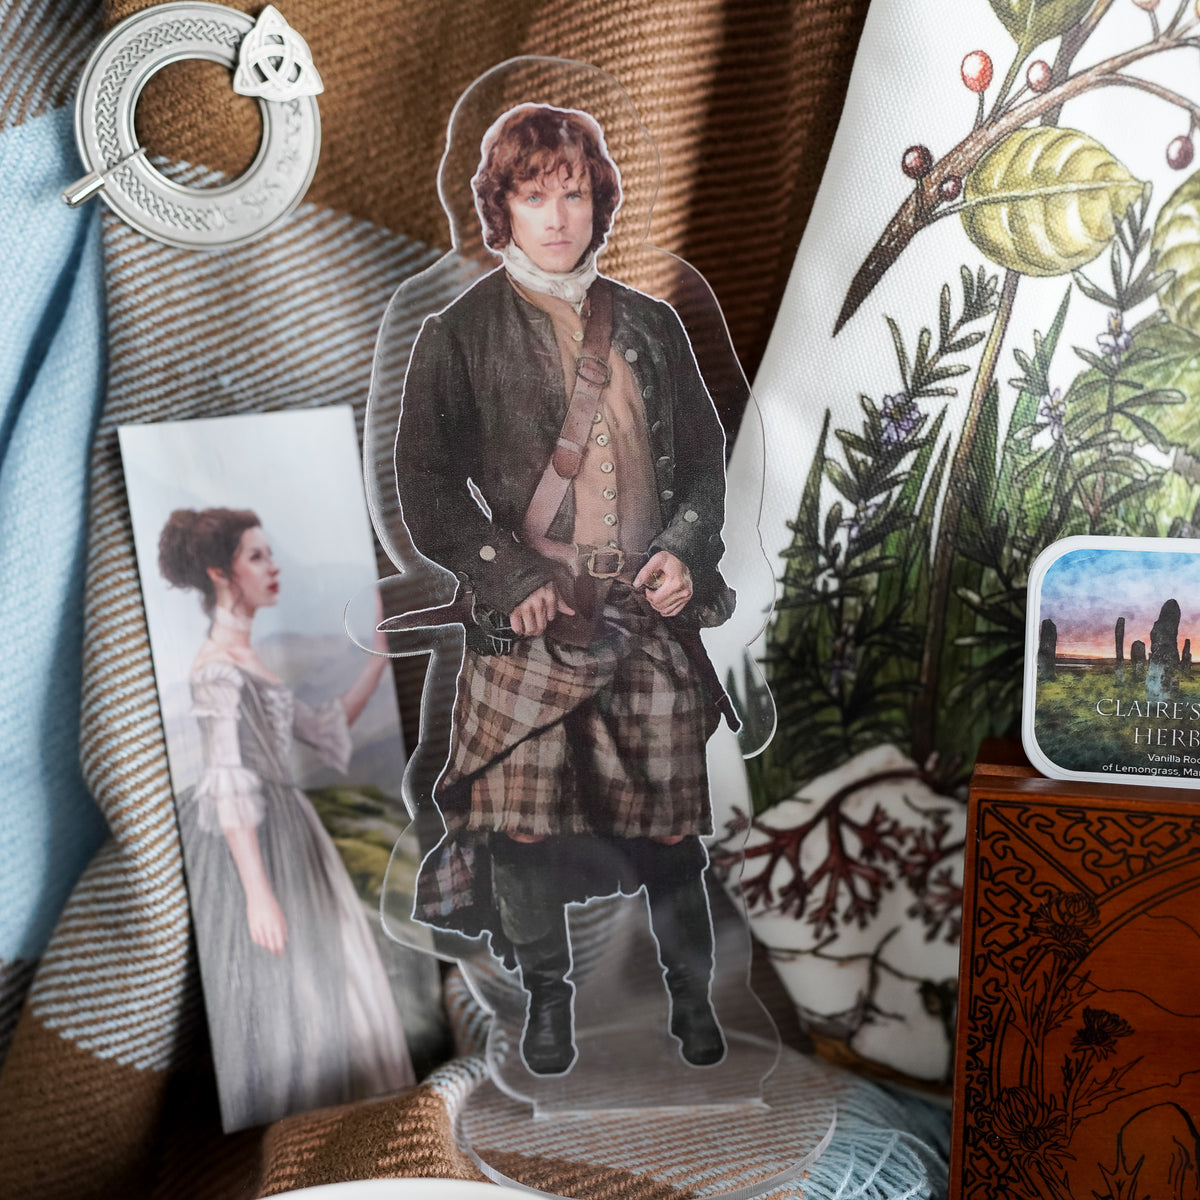 Pocket Sized Jamie Standee is a hunky scottish man with reddish hair and a plaid kilt